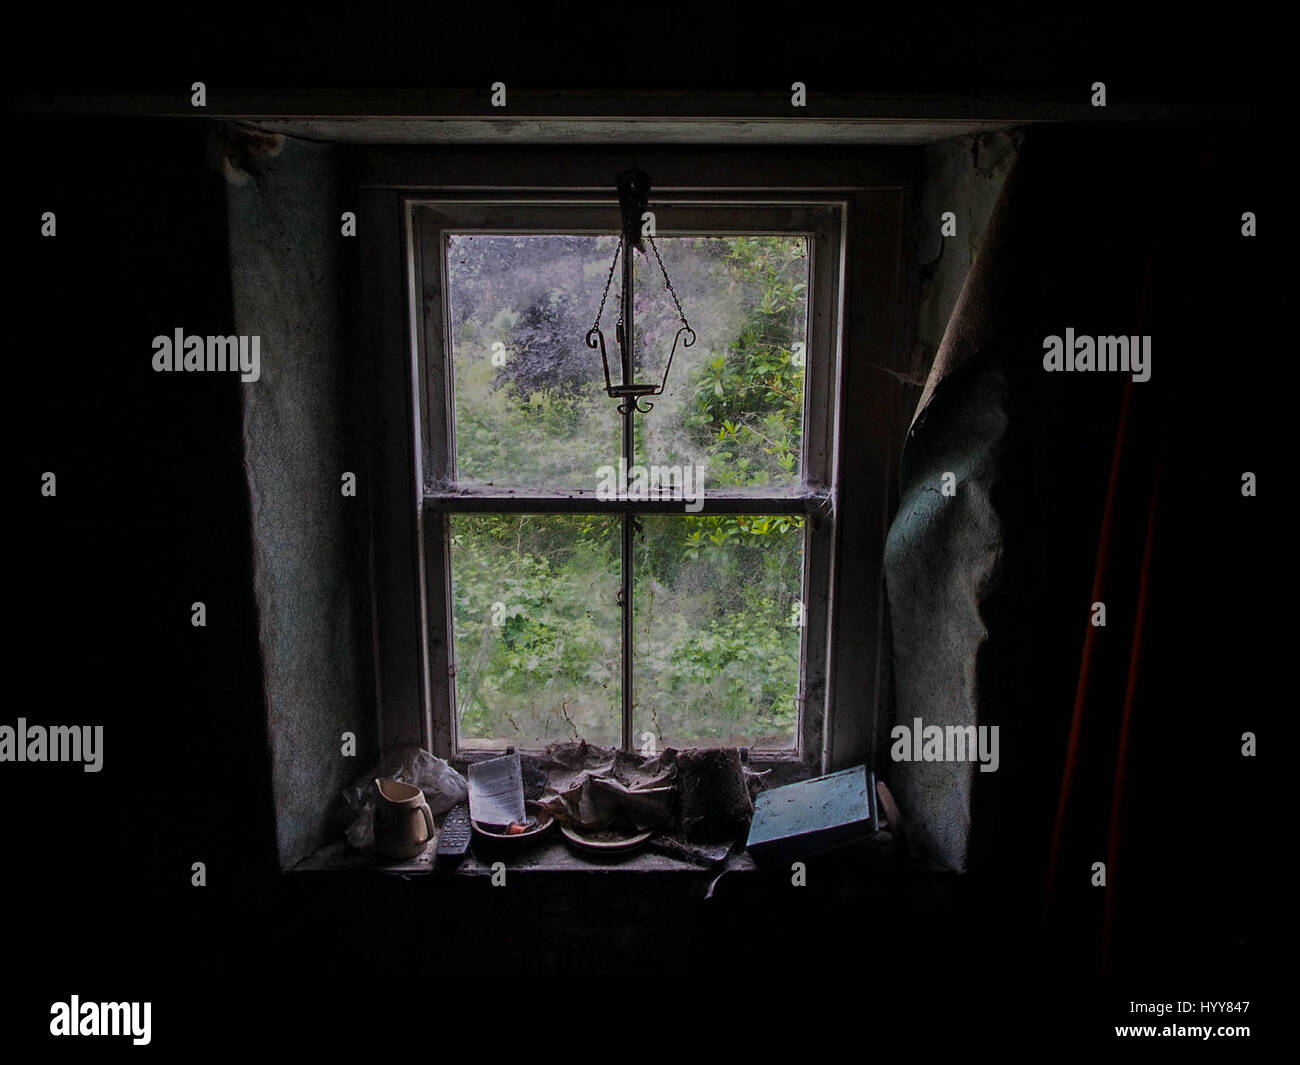 SCOTLAND: EERIE images reveal the decaying remains of a once idyllic countryside cottage nestled deep in the Scottish countryside since it was left empty more than ten-years-ago. The series of pictures show a moss ridden sink piled high with dishes, peeling wallpaper and paintings that have been left strewn across the floor. One image even shows a Rayburn cooker with pans left on the stove and another shows a holiday souvenir left on the windowsill. The spooky shots were taken in Ardnamurchan, Scotland by an urban explorer known only as The Forgotten Scotland. To take the pictures he used an O Stock Photo